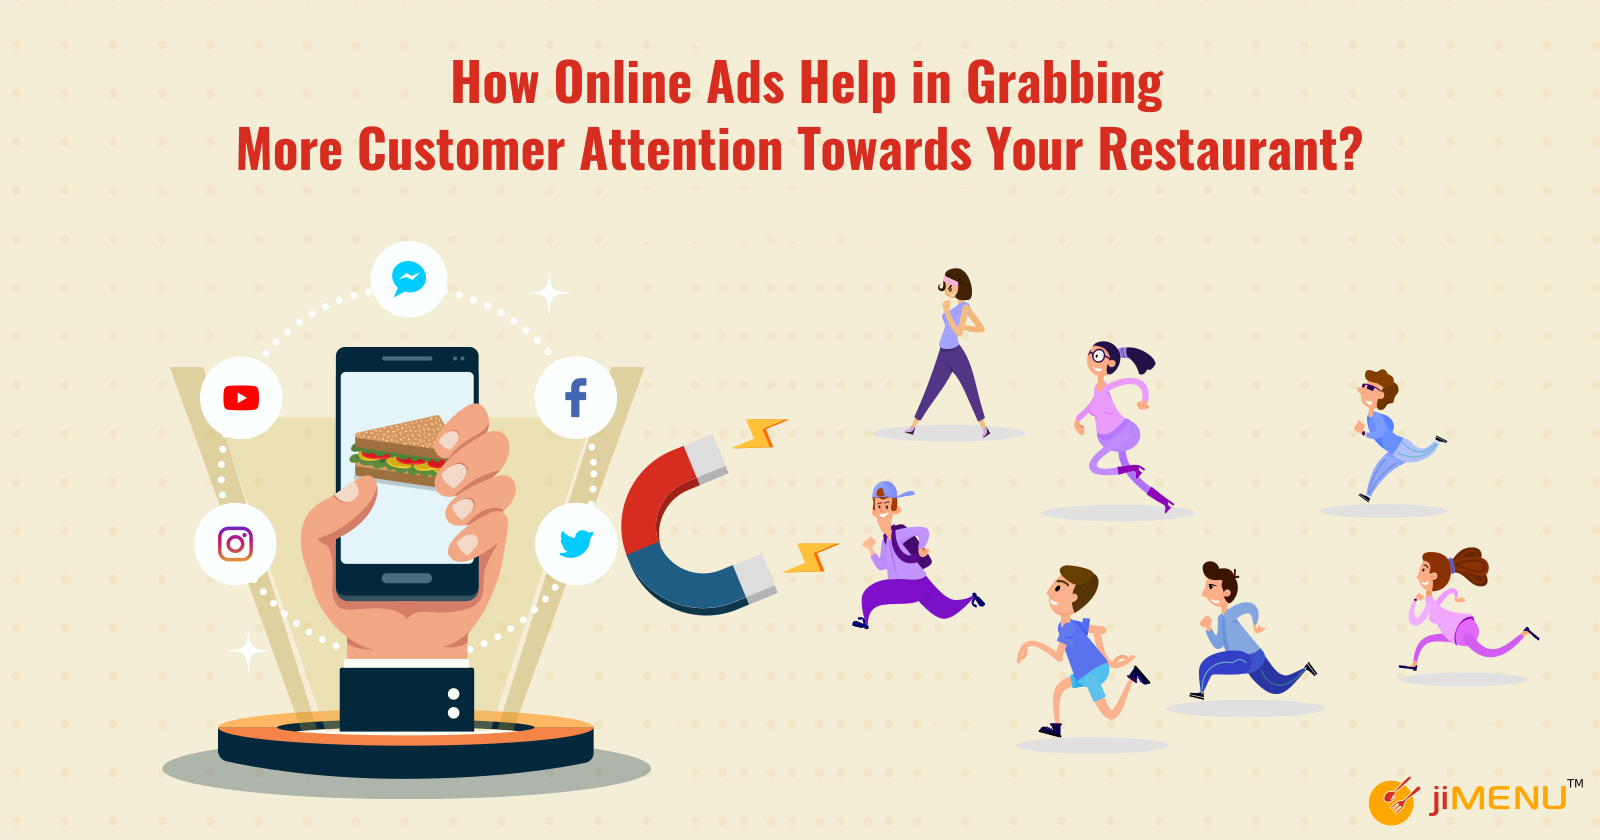 How Online Ads Help in Grabbing More Customer Attention Towards Your Restaurant?